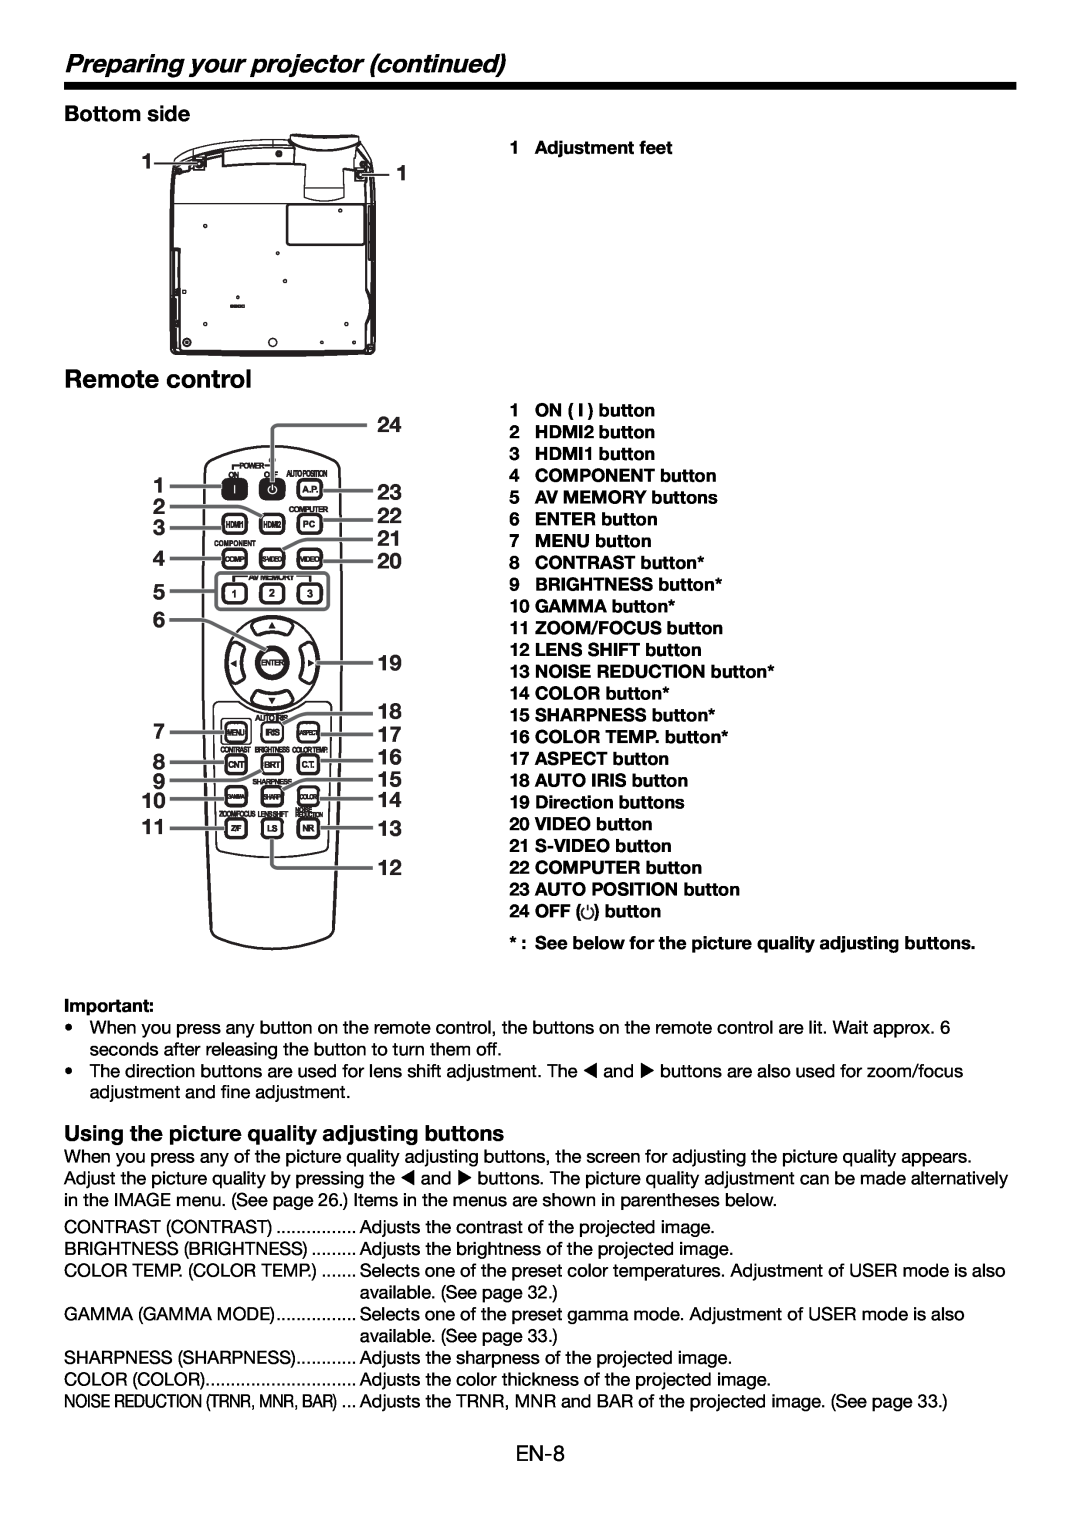 Mitsubishi Electronics HC6000 Remote control, Bottom side, Using the picture quality adjusting buttons, Adjustment feet 